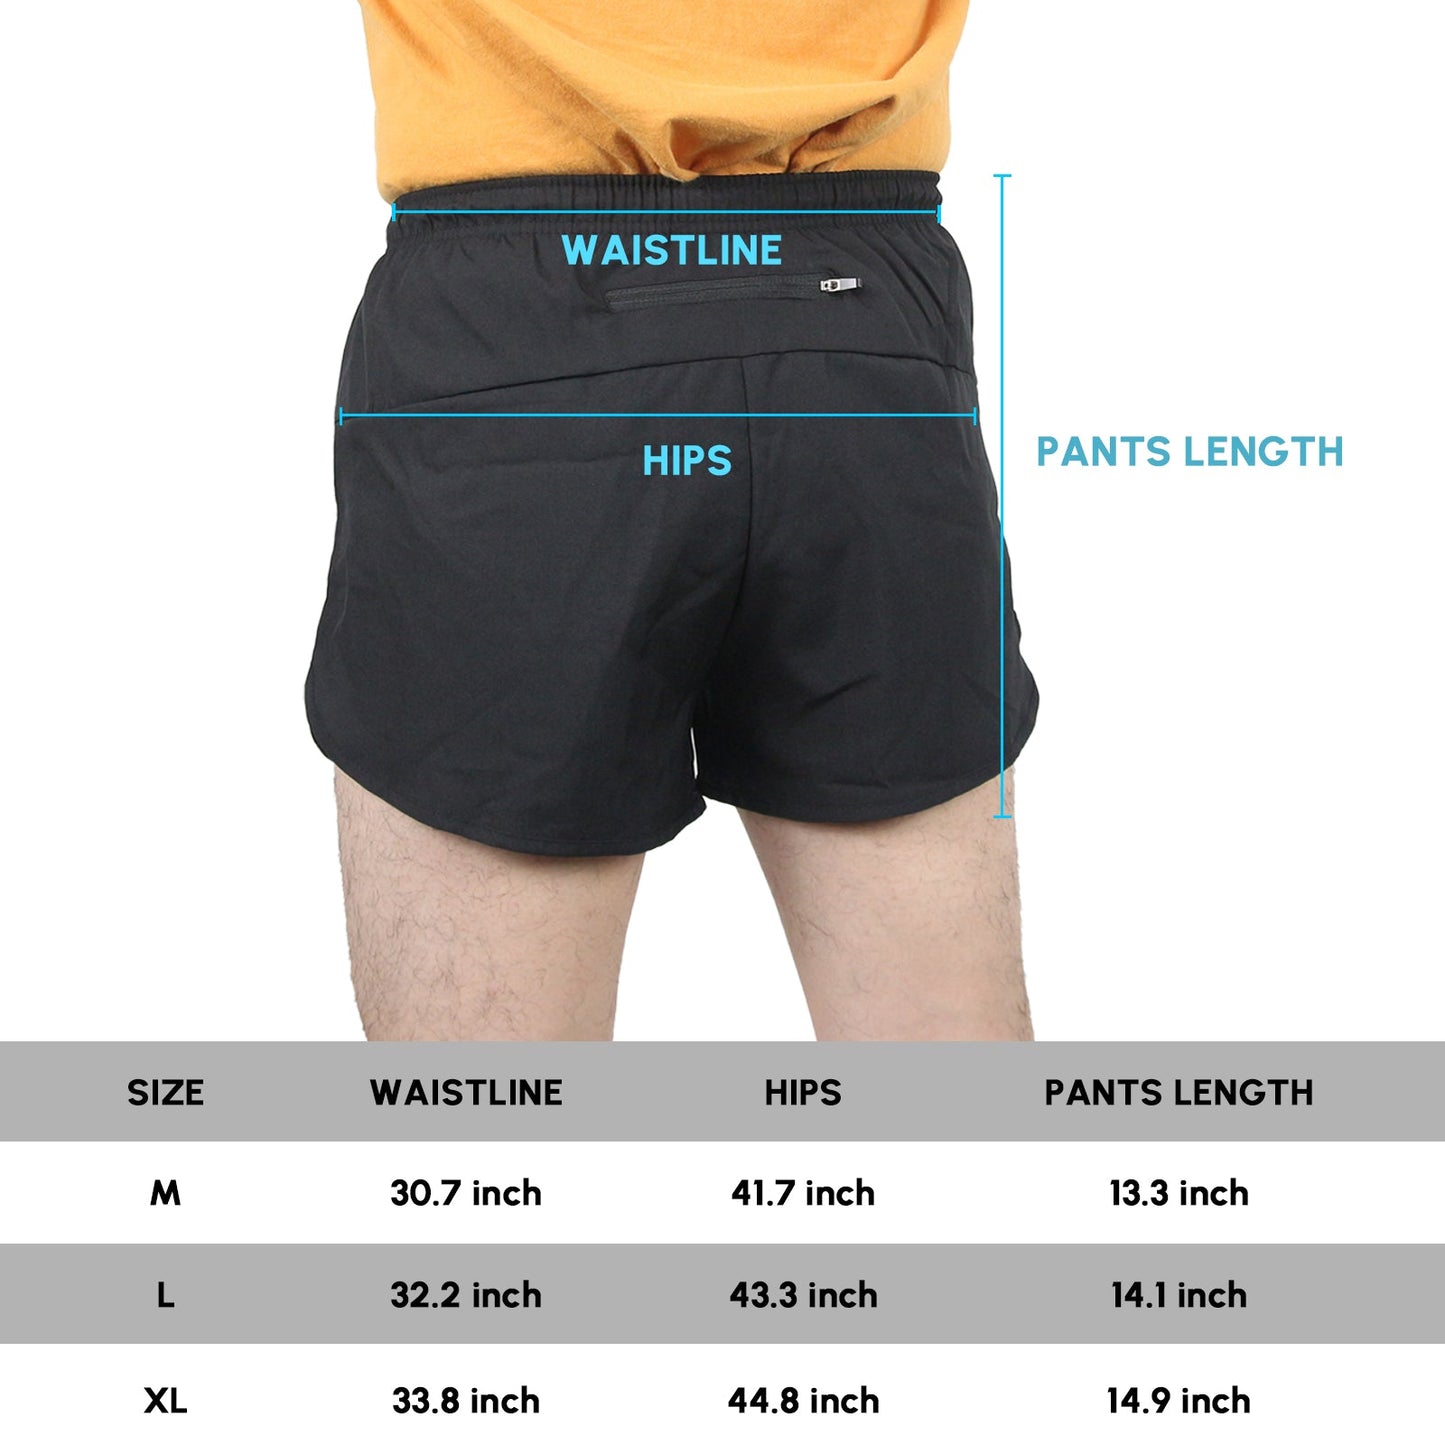 Men's Quick Dry Athletic Shorts size chart. If using screen readers please contact us